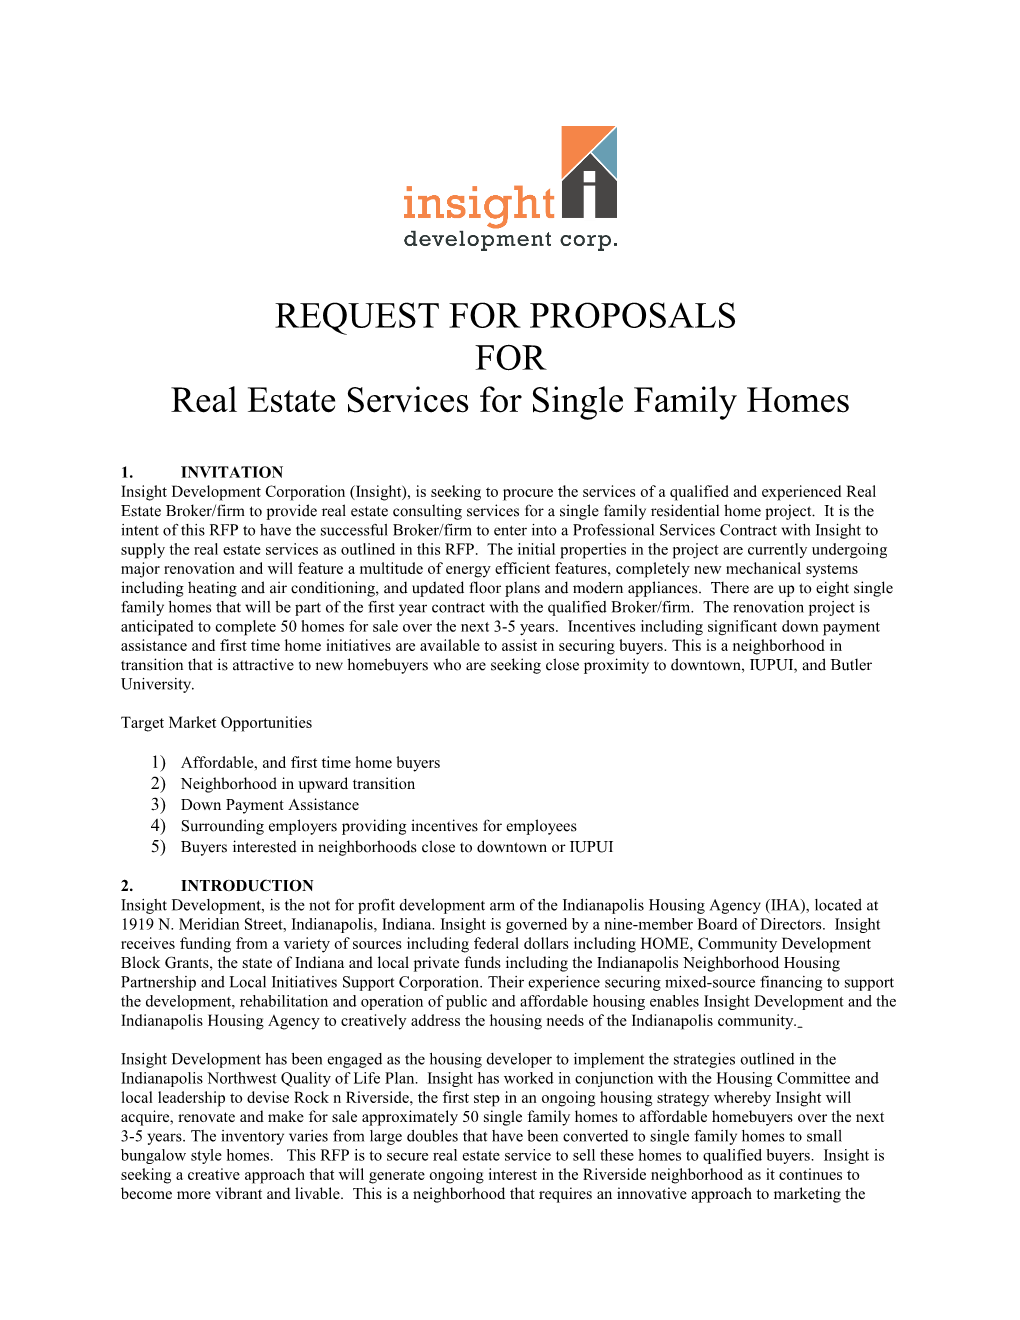 Real Estate Services for Single Family Homes